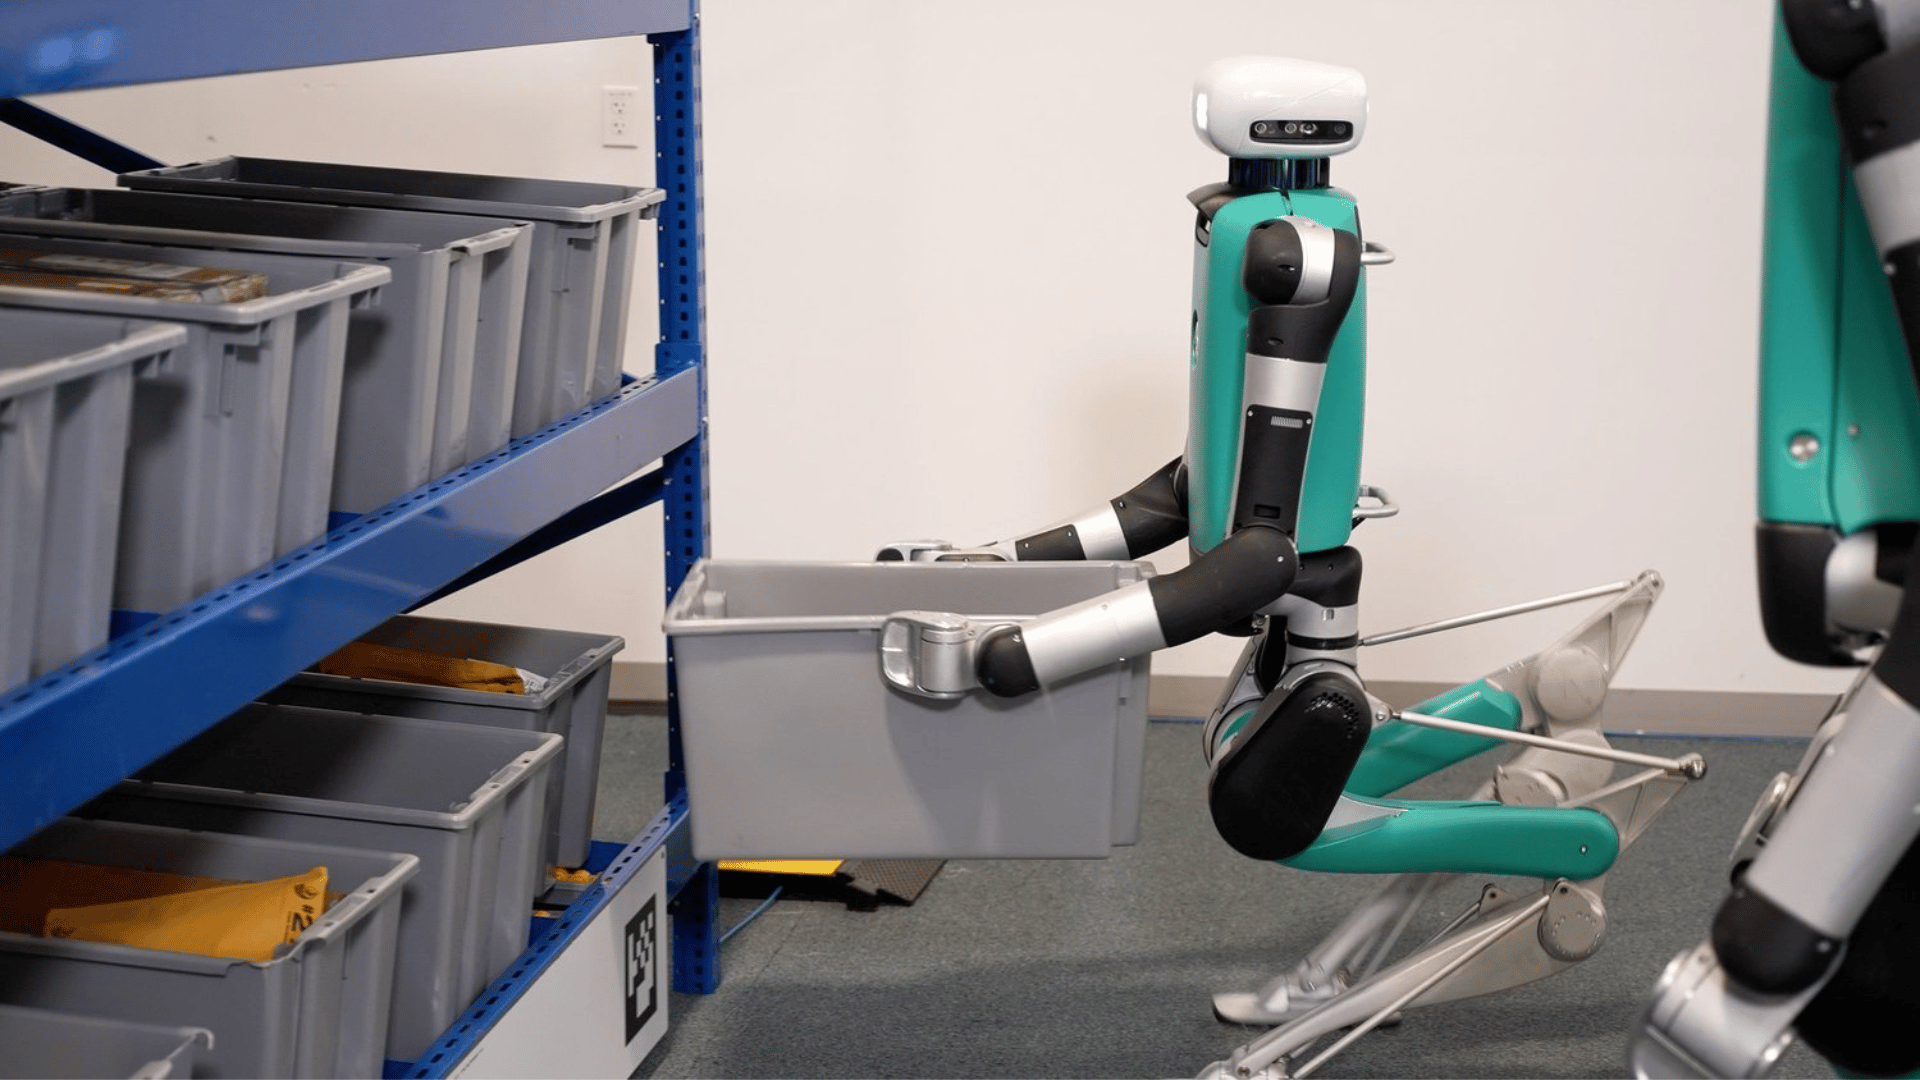 Digit, the humanoid robot, at work